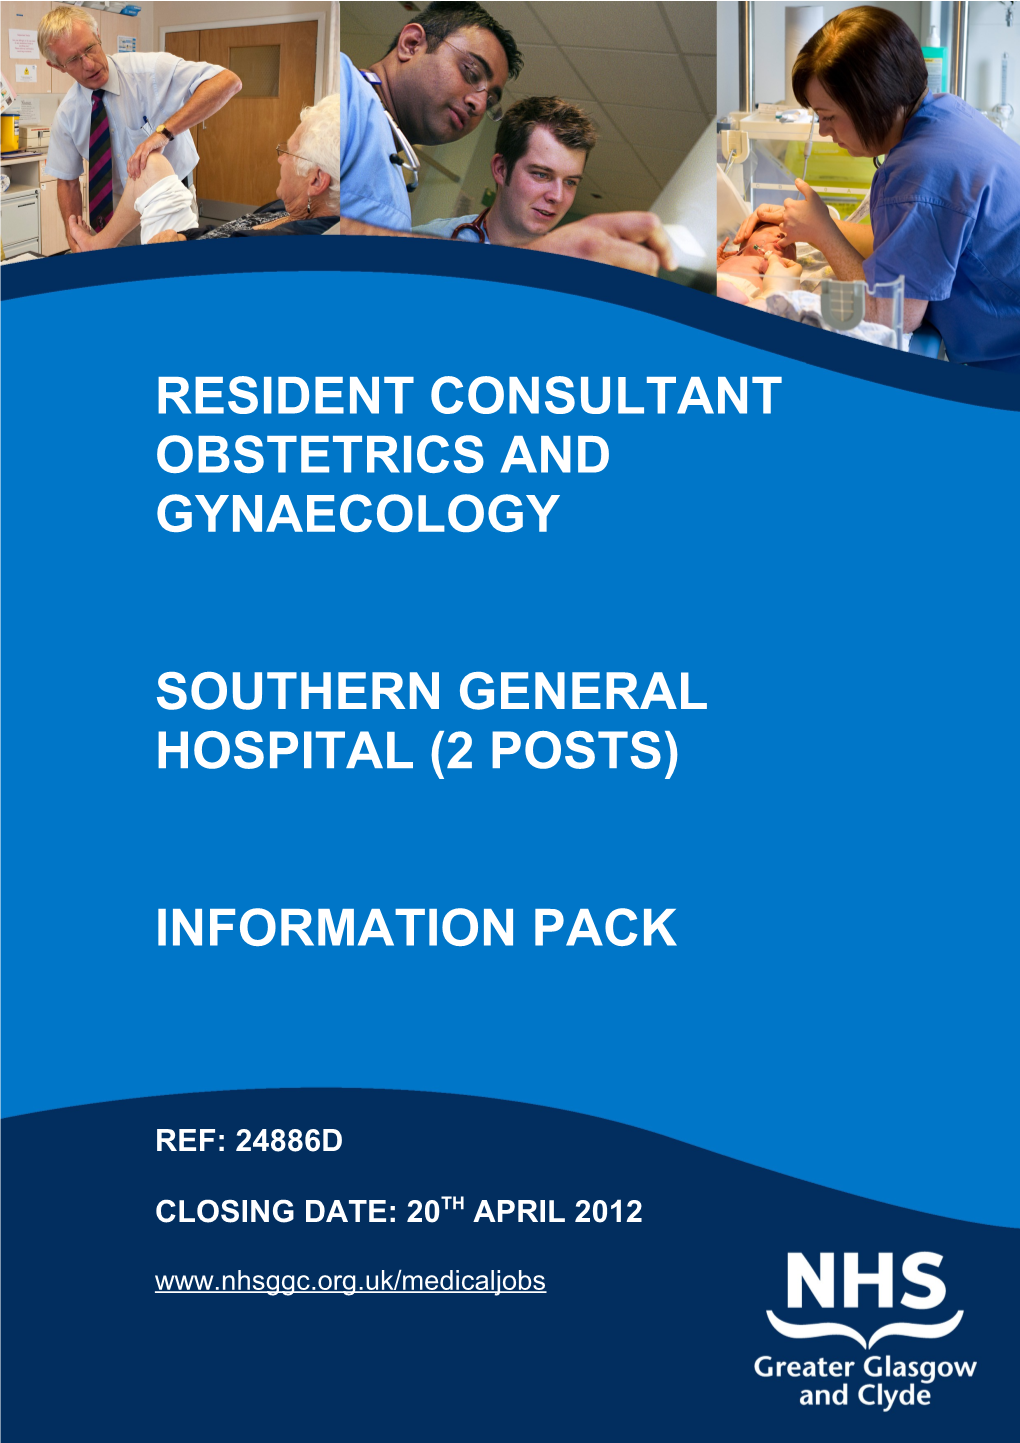 Resident Consultant Obstetrics and Gynaecology